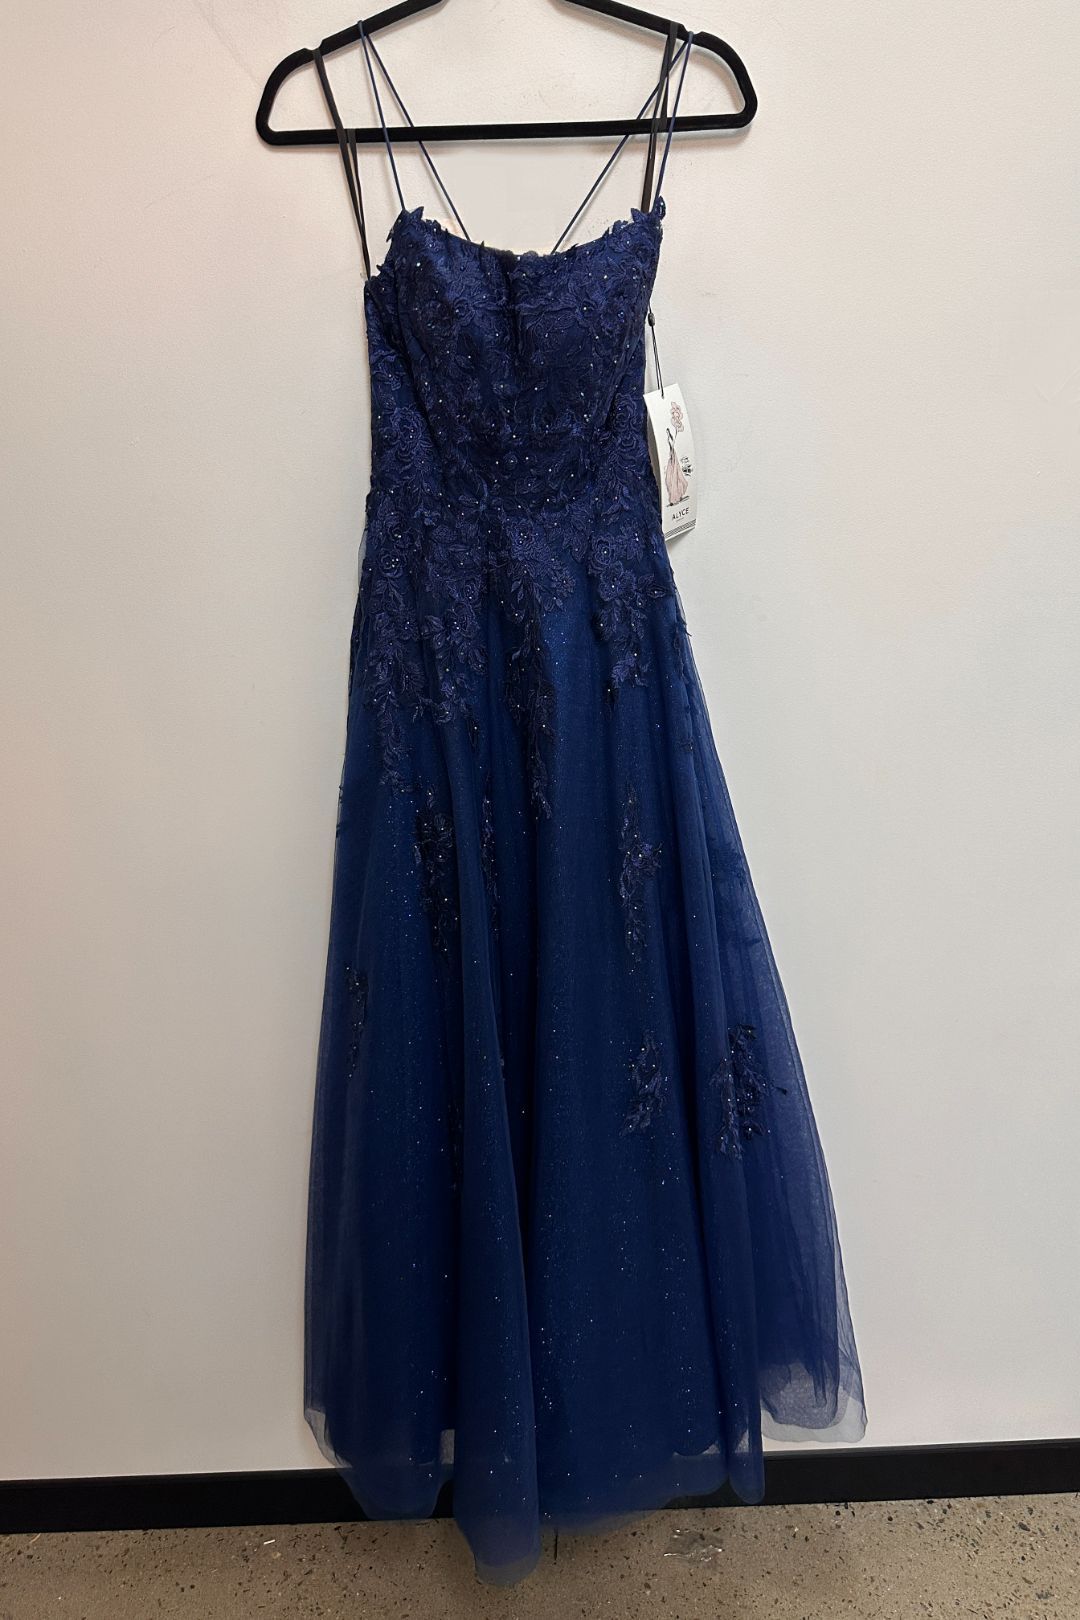 Alyce Paris Full Length Lace Dress in Navy